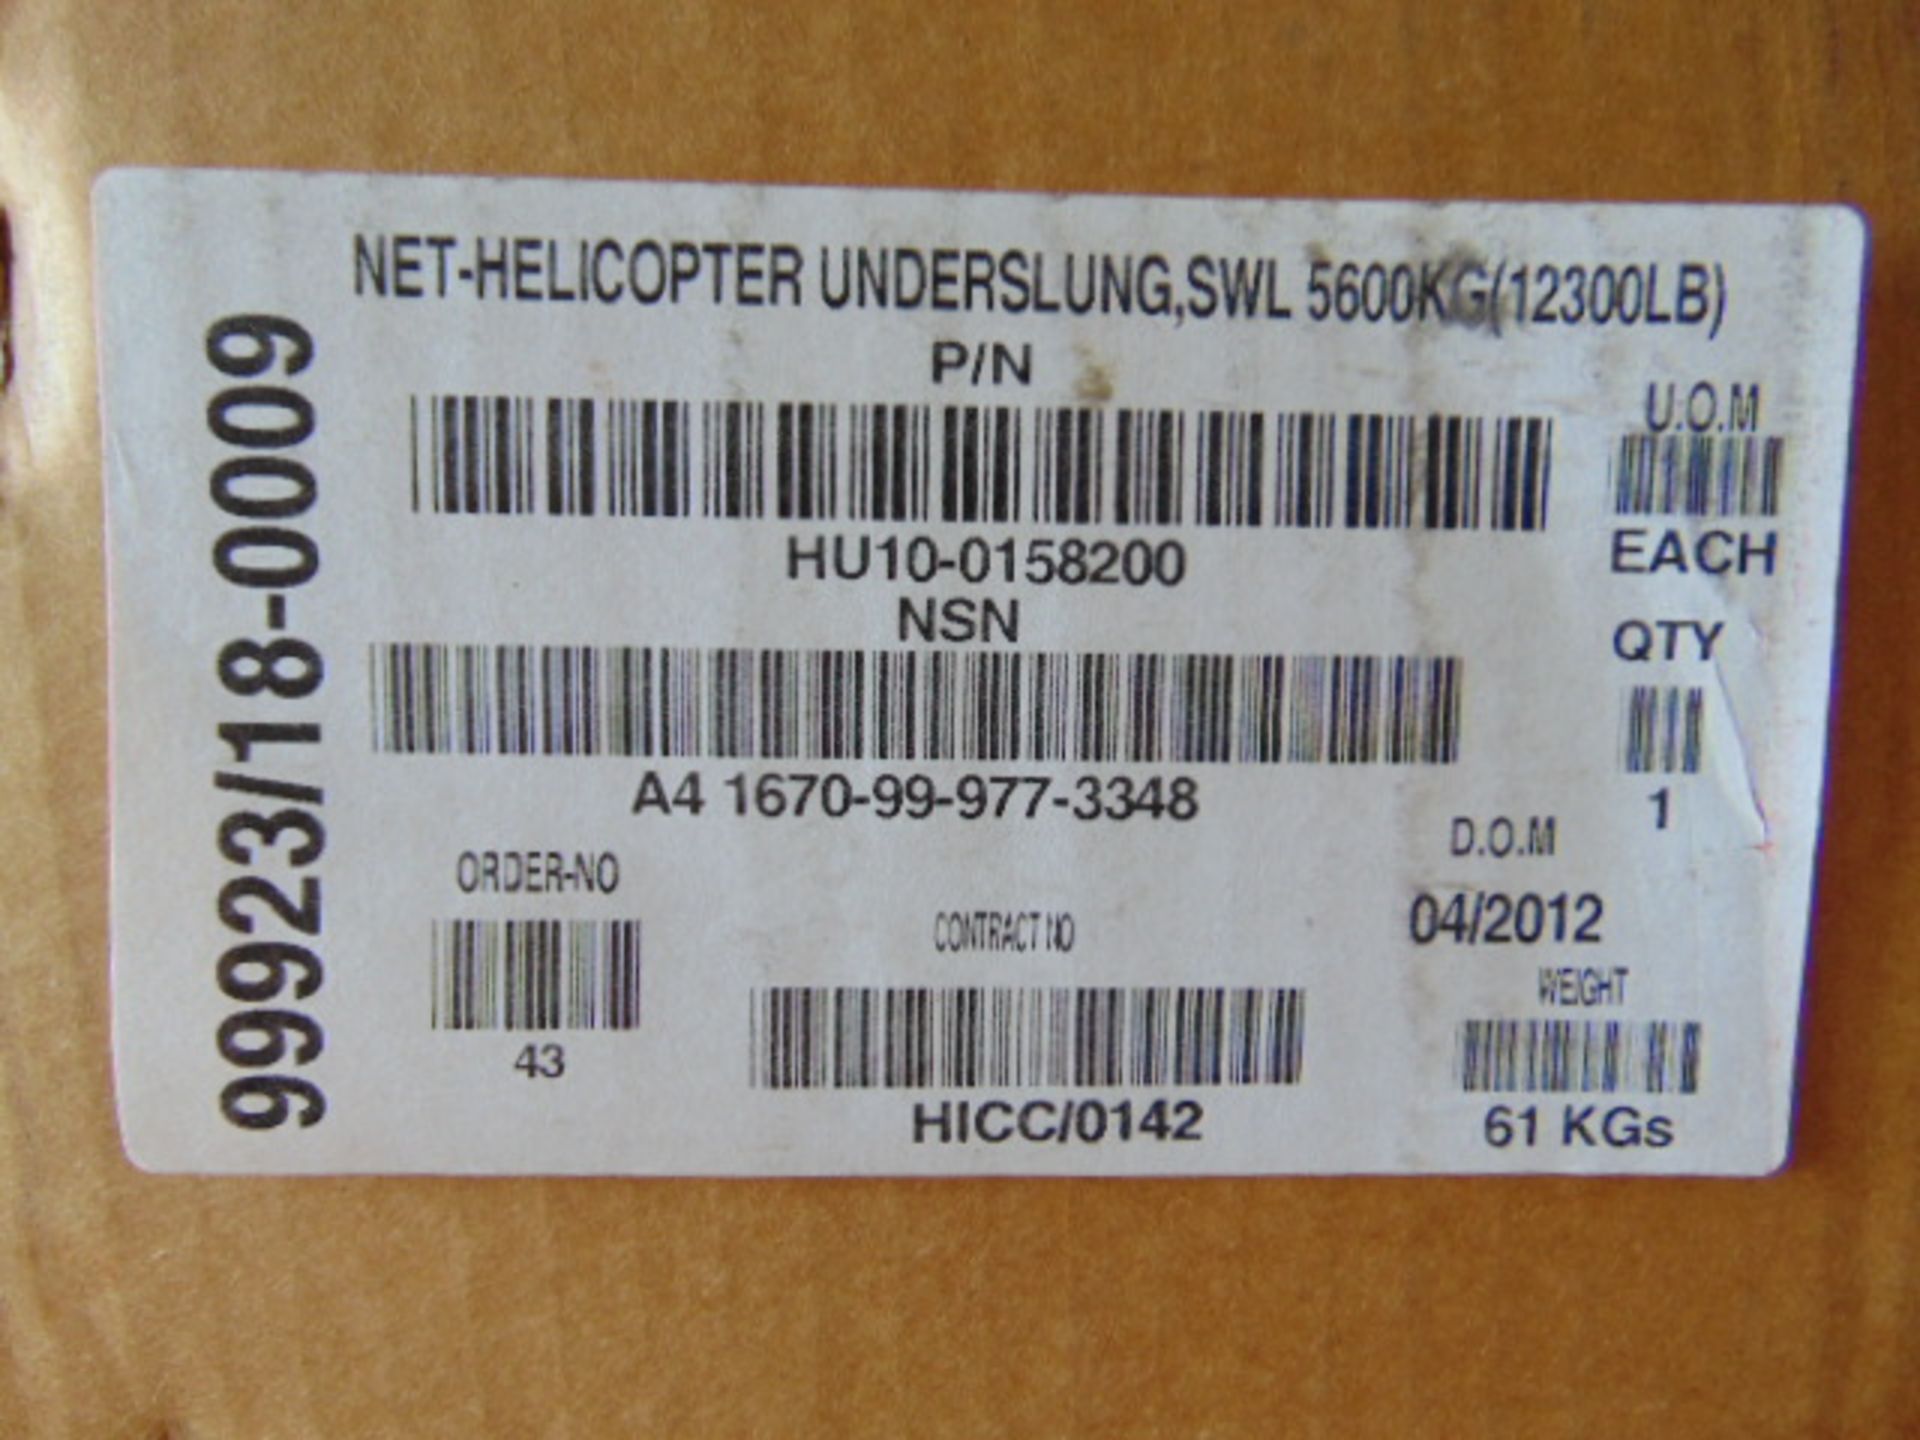 5600Kg Helicopter Cargo Net - Image 12 of 14